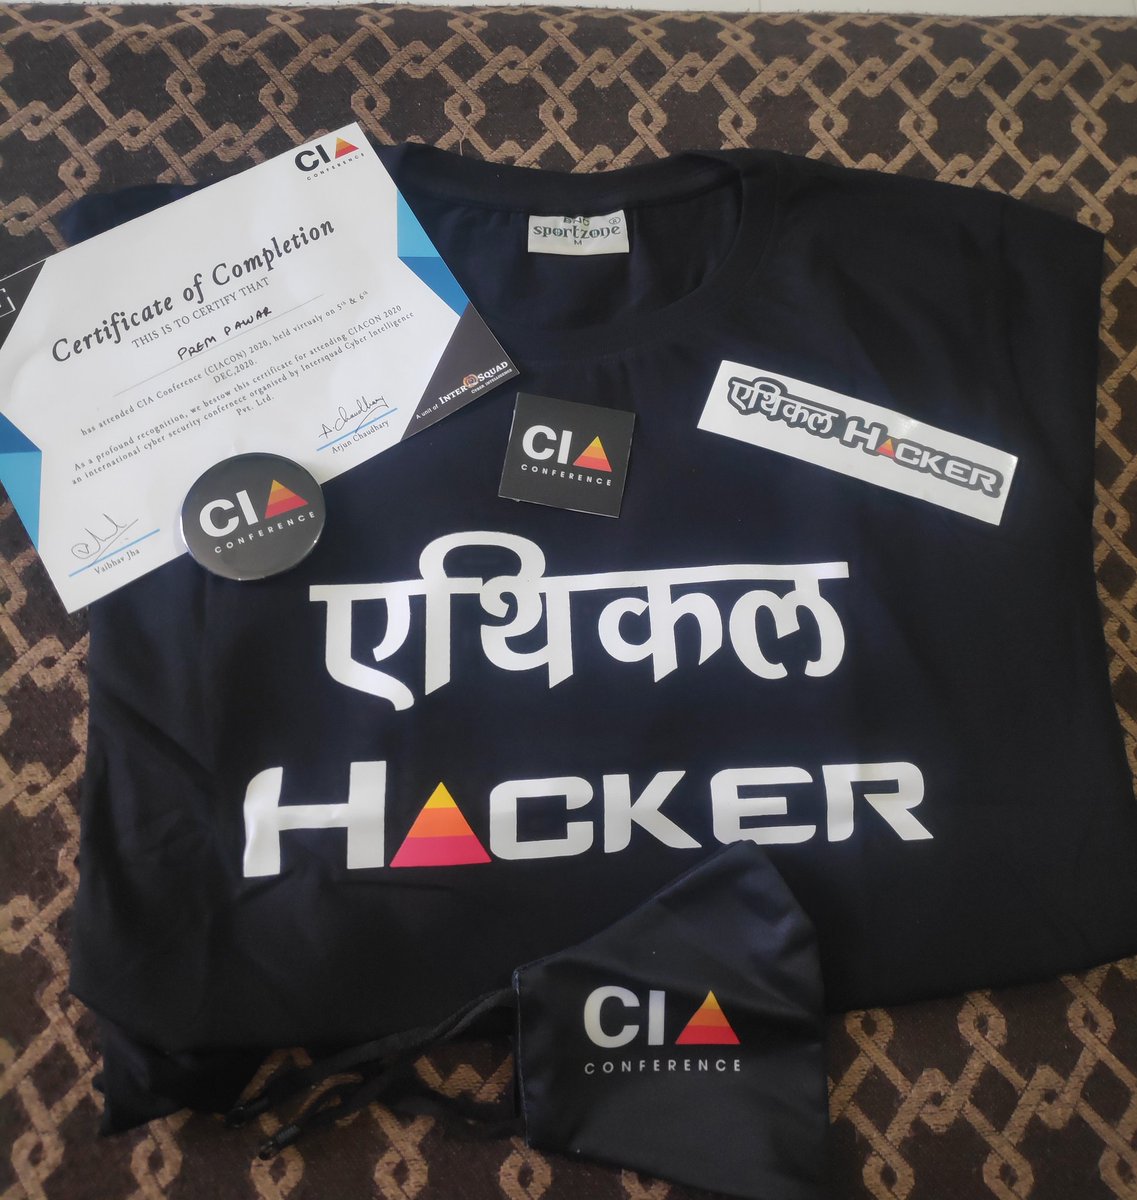 Amazing goodies received from @CiaConference ...
Thank you so much #ciacon and @vaibhavkrjha sir for this opportunity. 
#ciaconference  
#ciacon2020